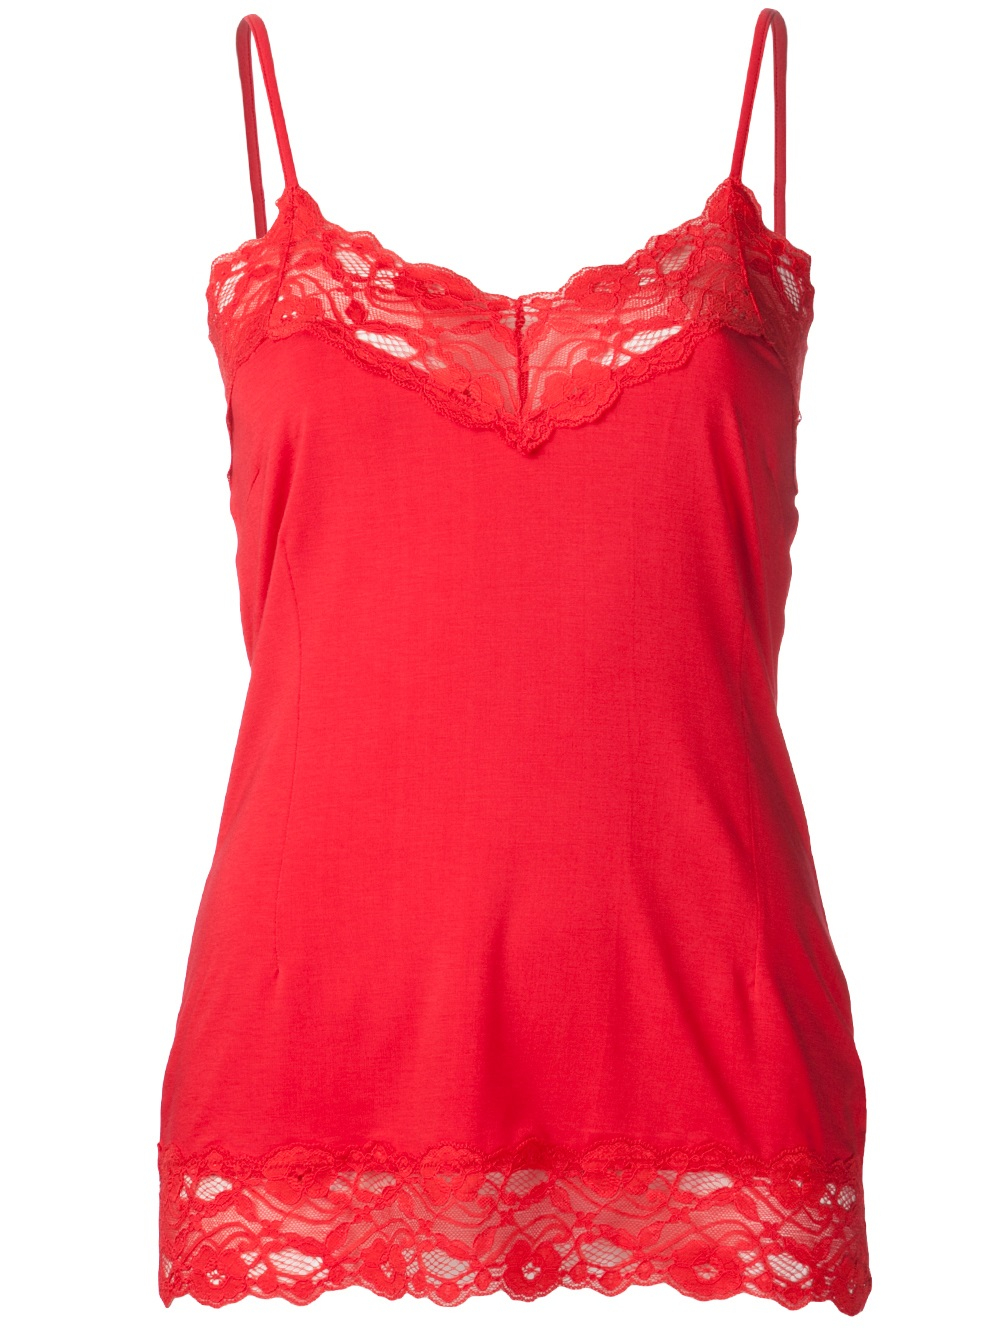 Lyst - Allude Lace Cami in Red